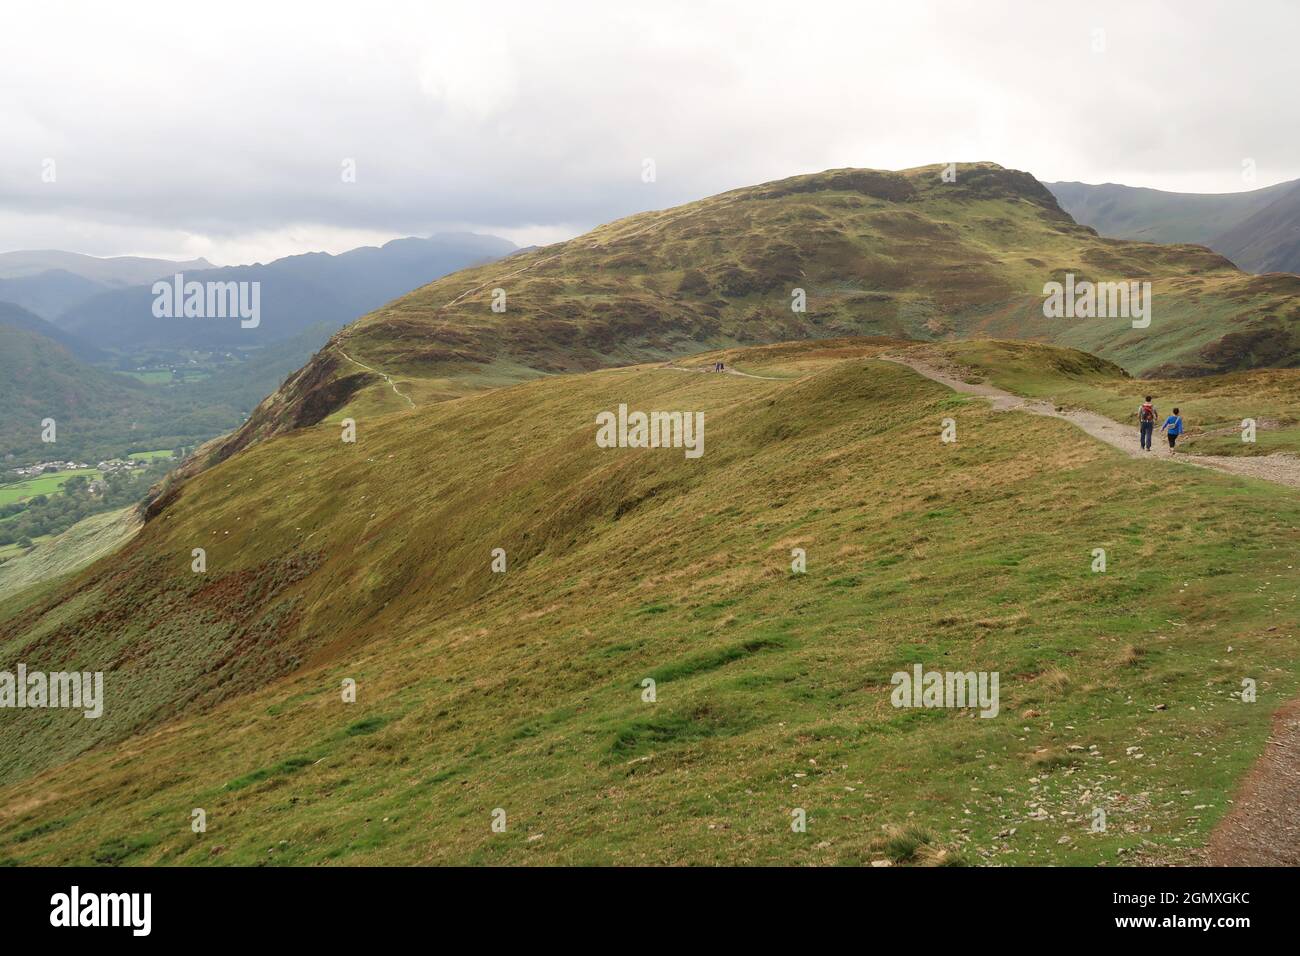 Cat Bells, Lake District, UK. A popular ridge path crowded with walkers on a cloudy September weekend. Stock Photo